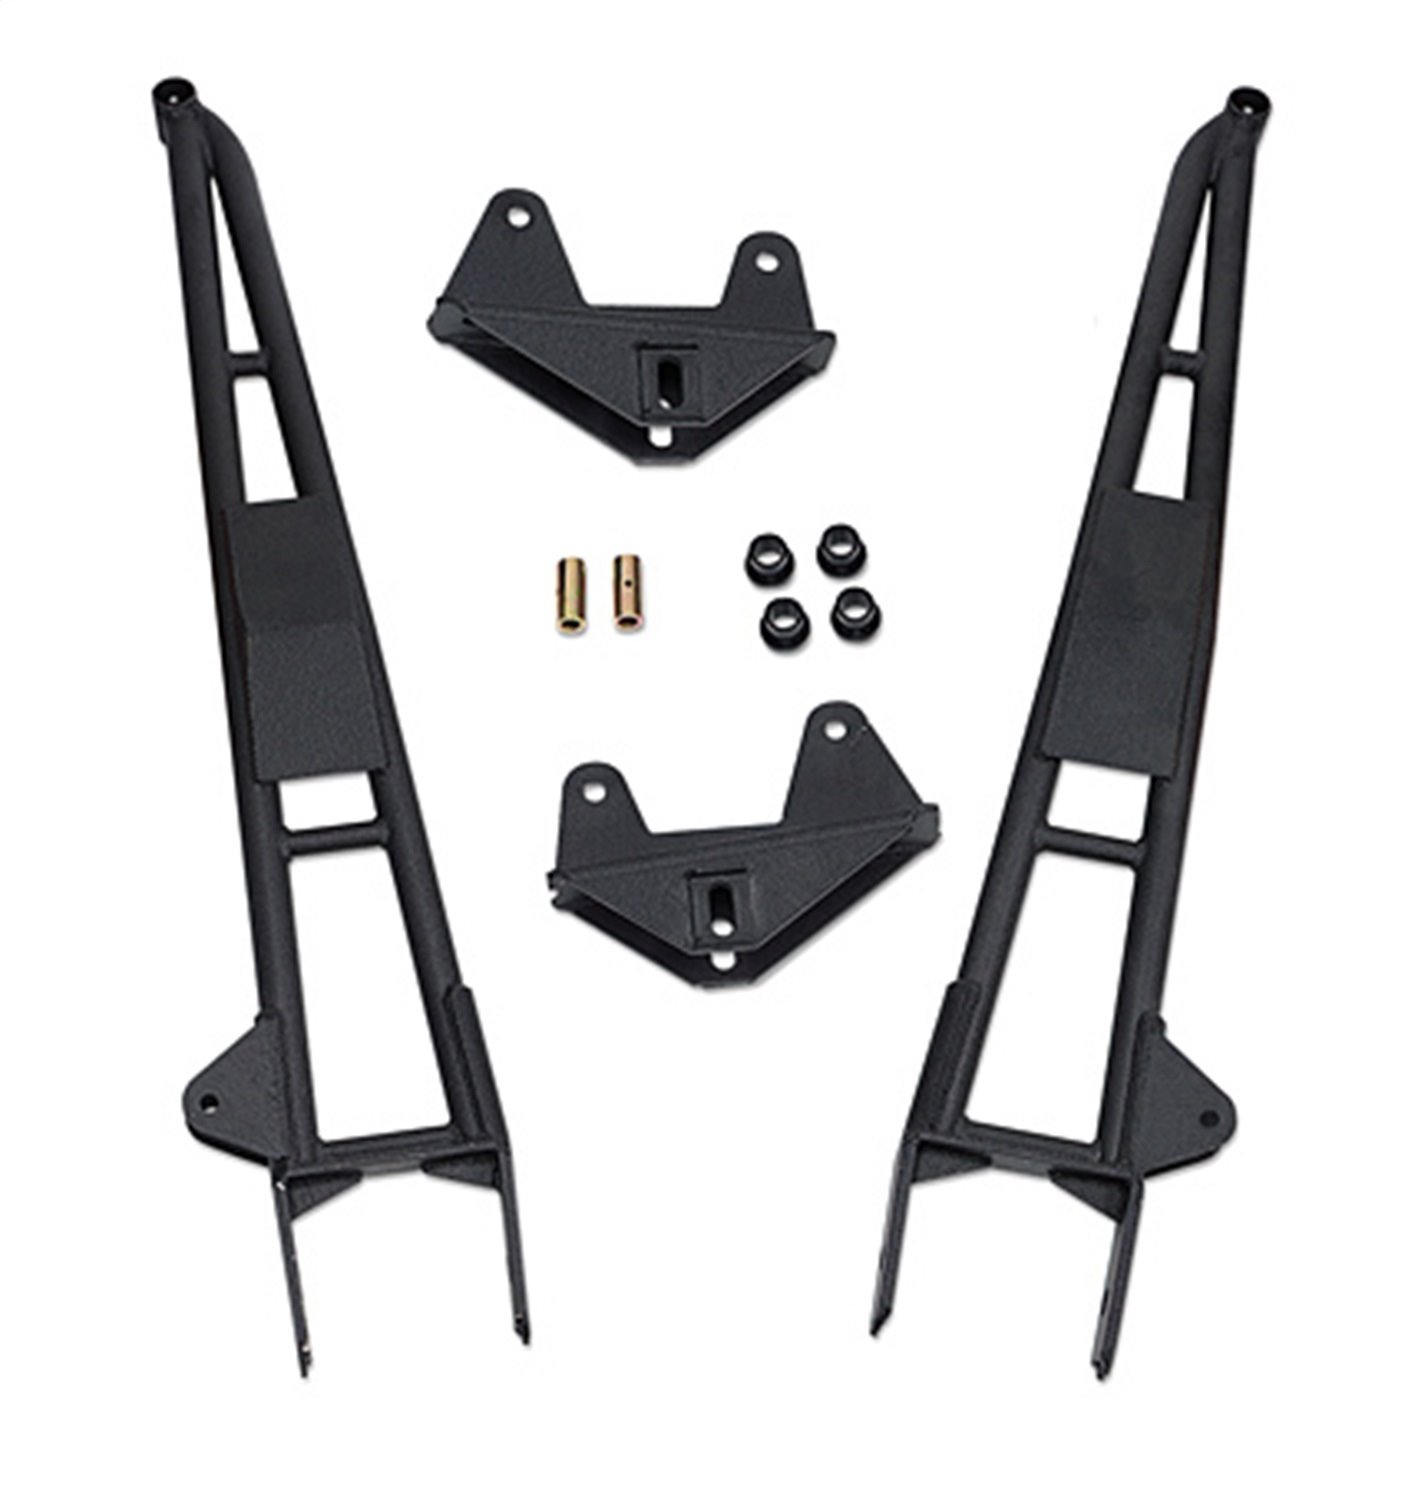 Radius Arm Kit 2.5 in. And 4 in.